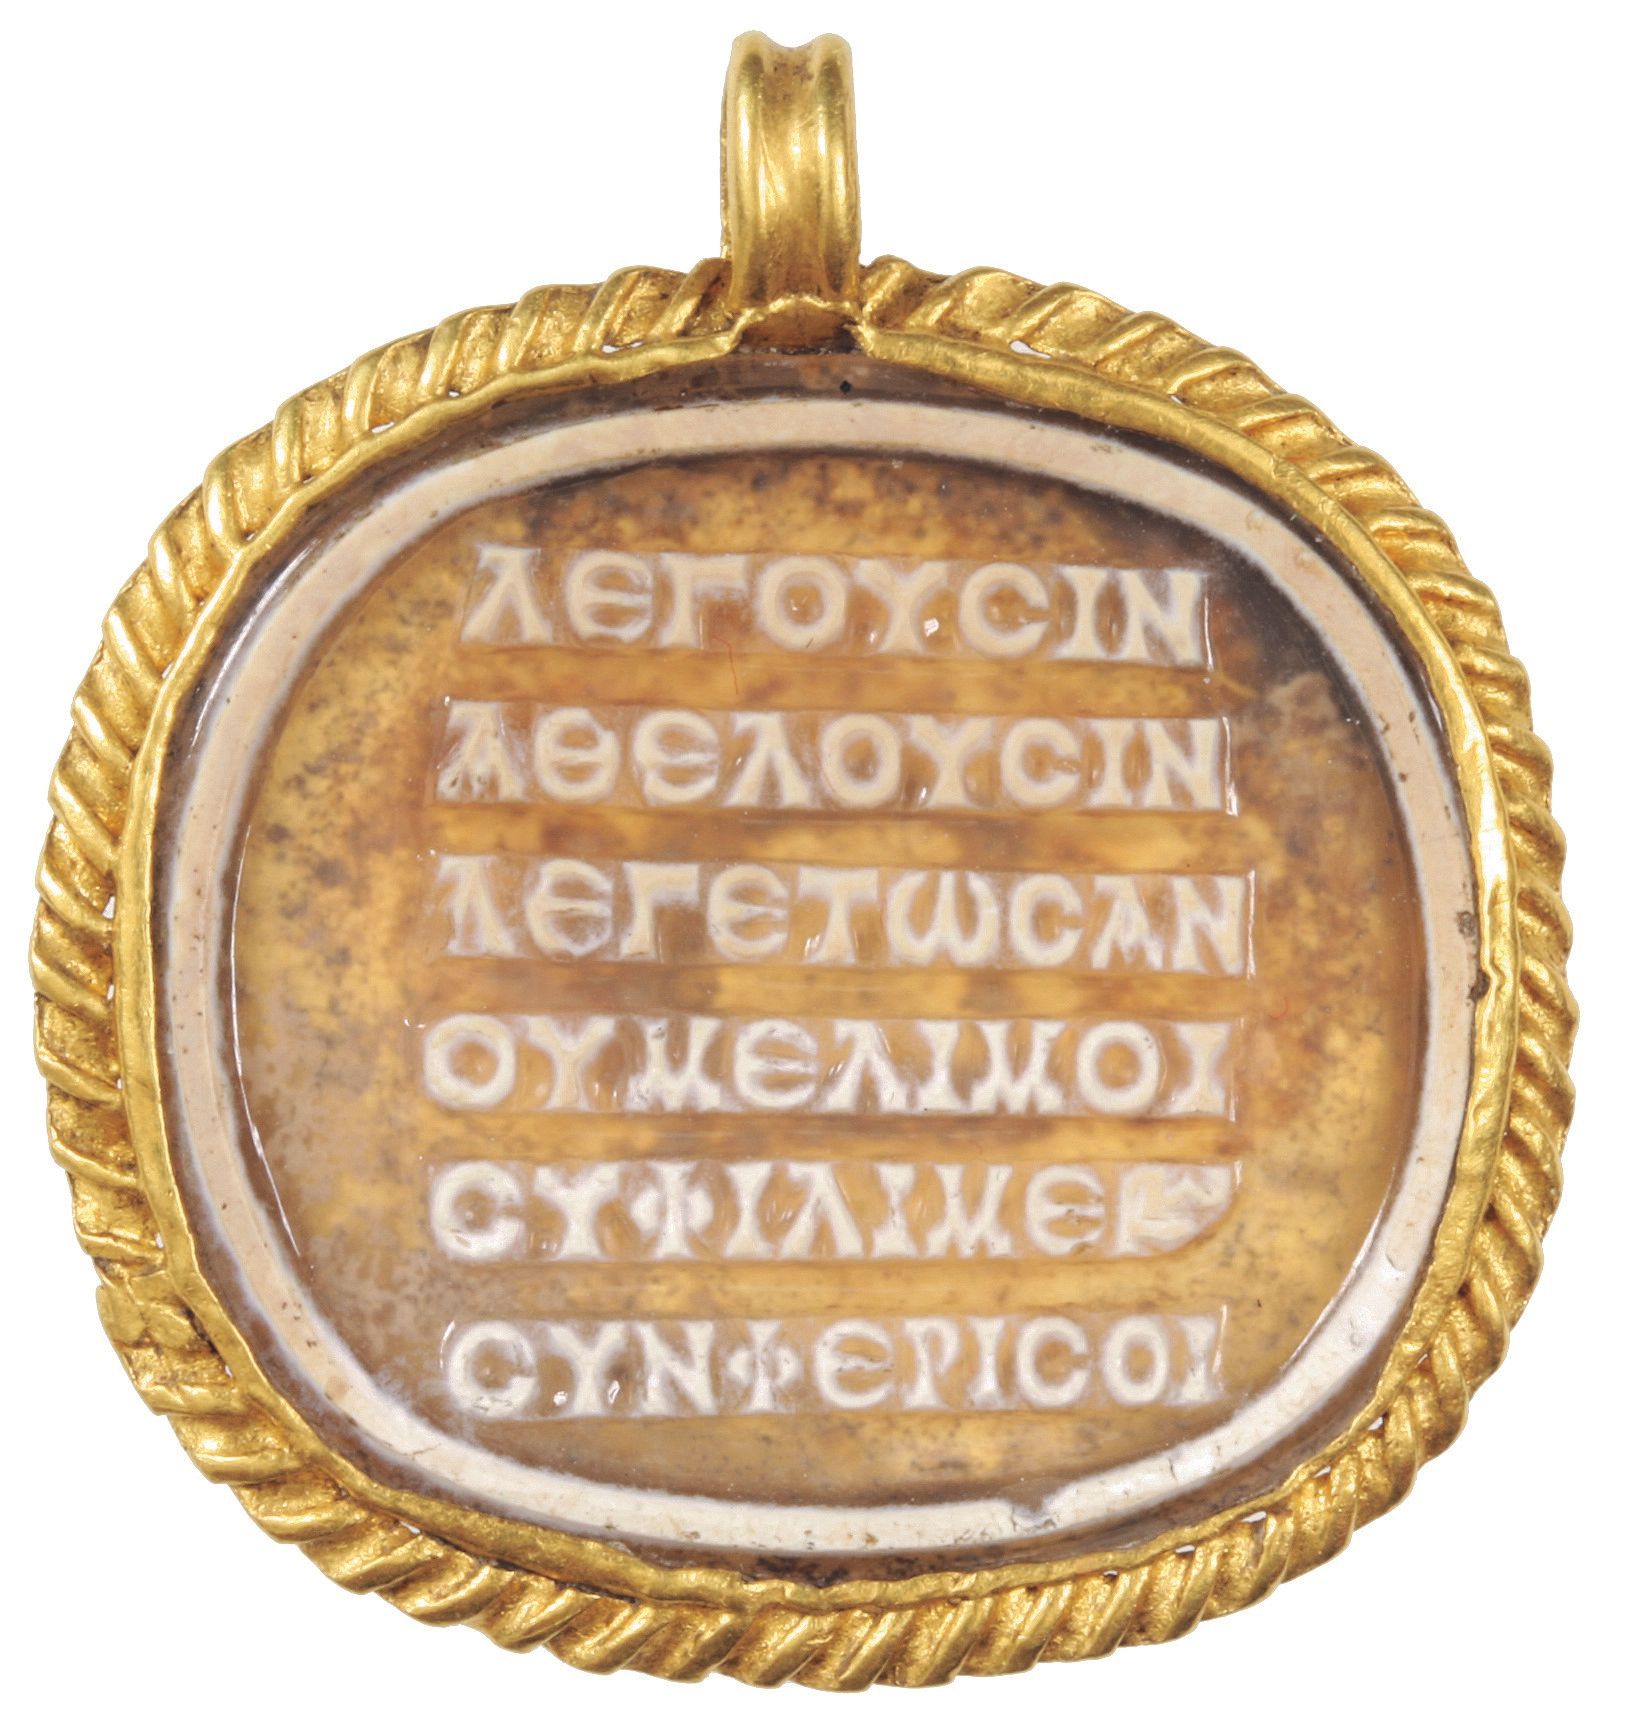 This is another ancient poem written in Greek, on a medallion.